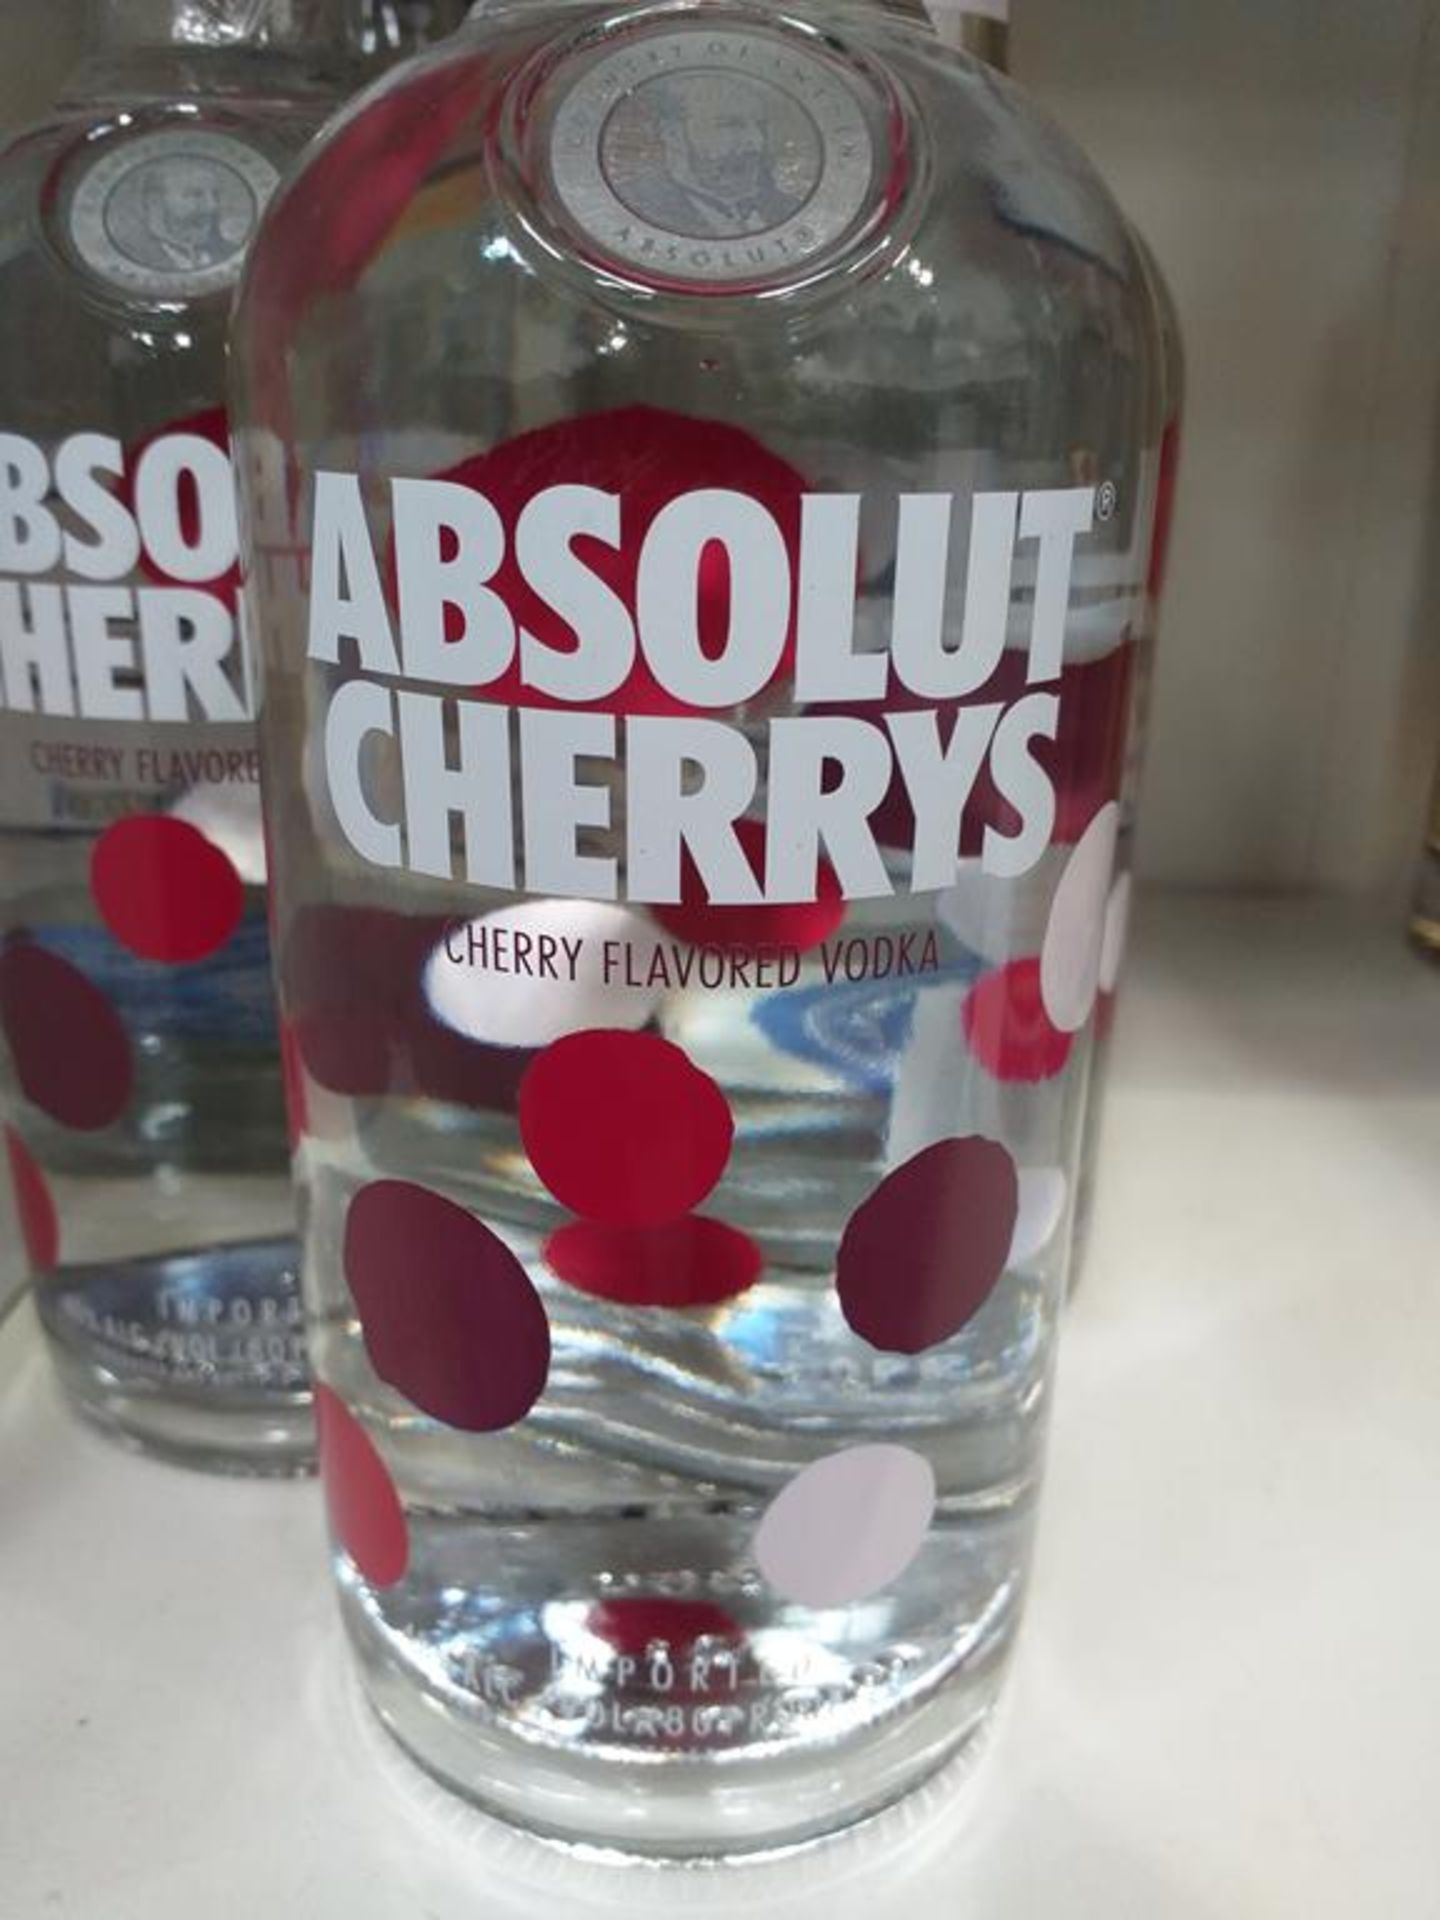 Four bottles of Jose Cuervo Especial Tequila Silver and three bottles of Absolut Cherry's Vodka - Image 2 of 5